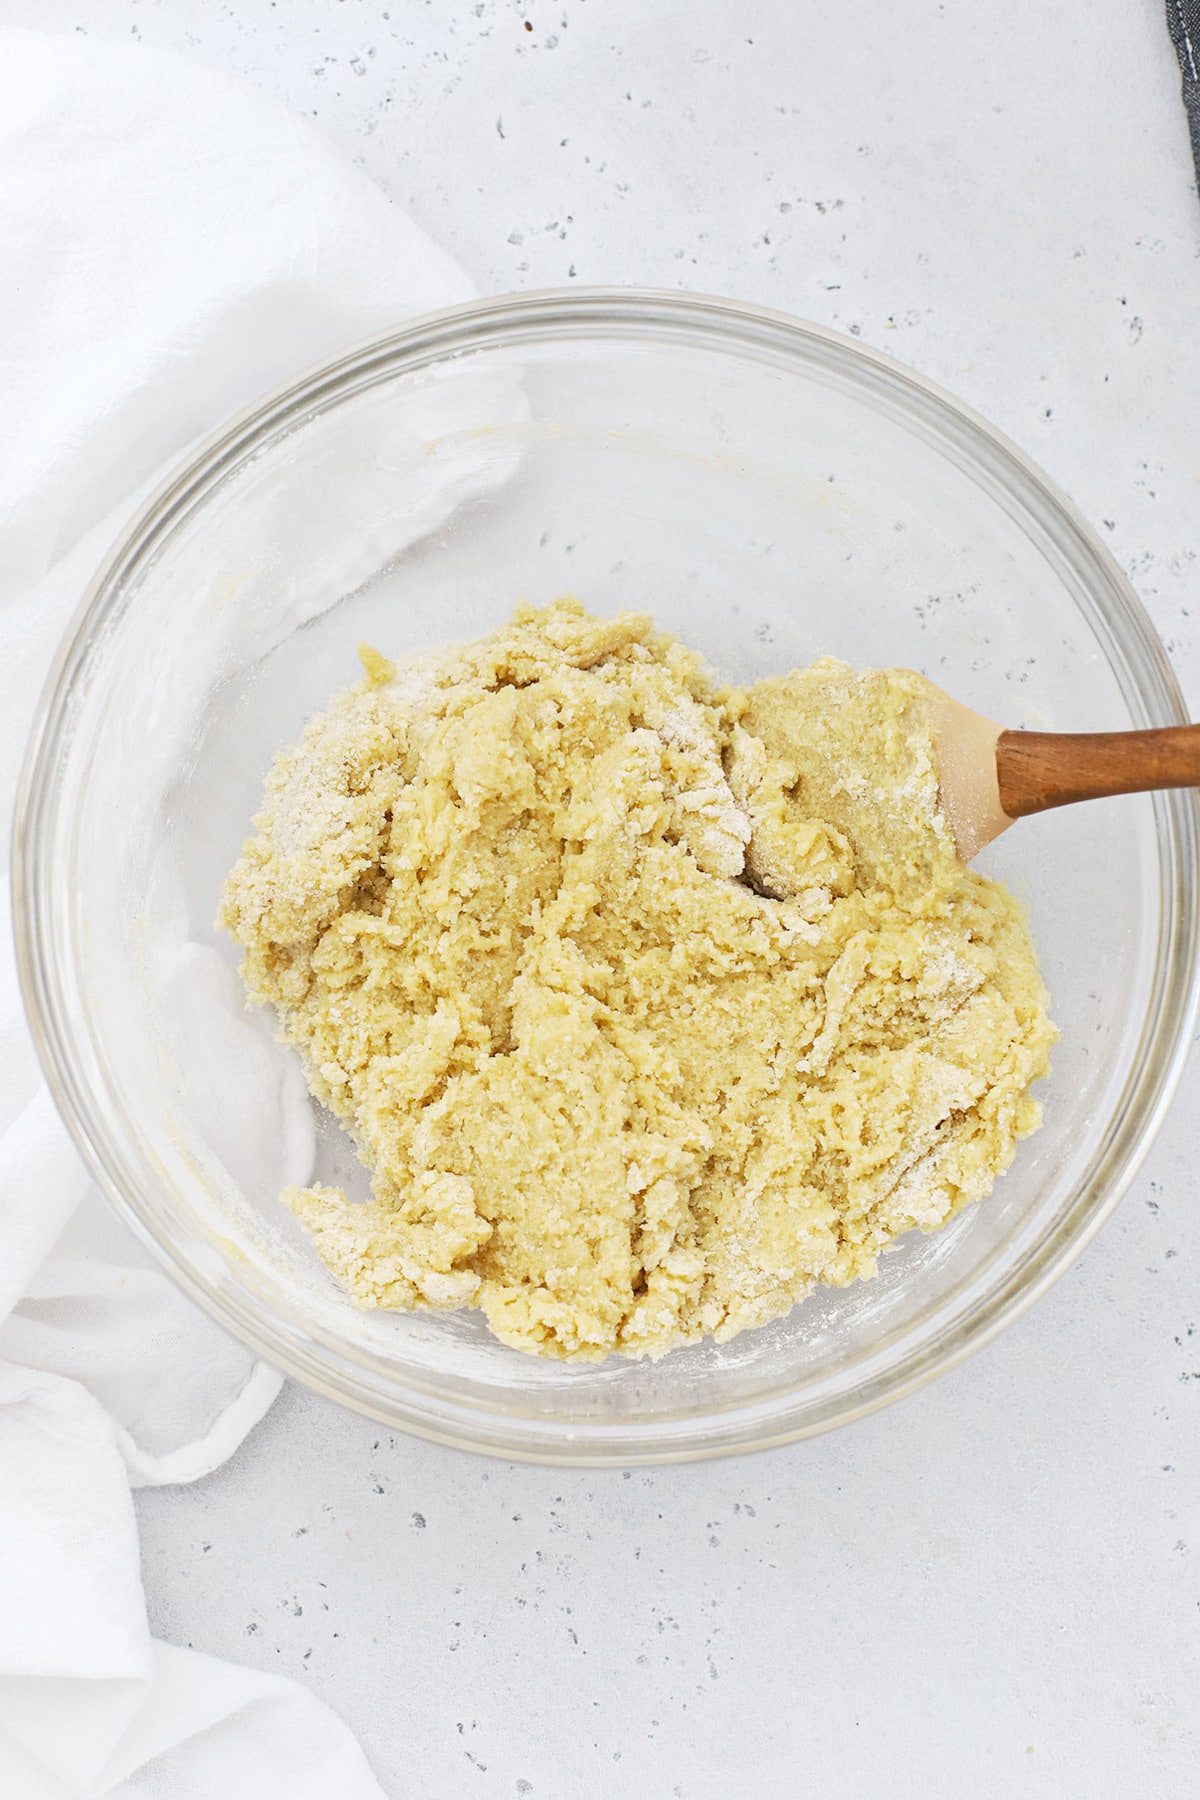 mixing eggs and sour cream into gluten-free texas sheet cake batter